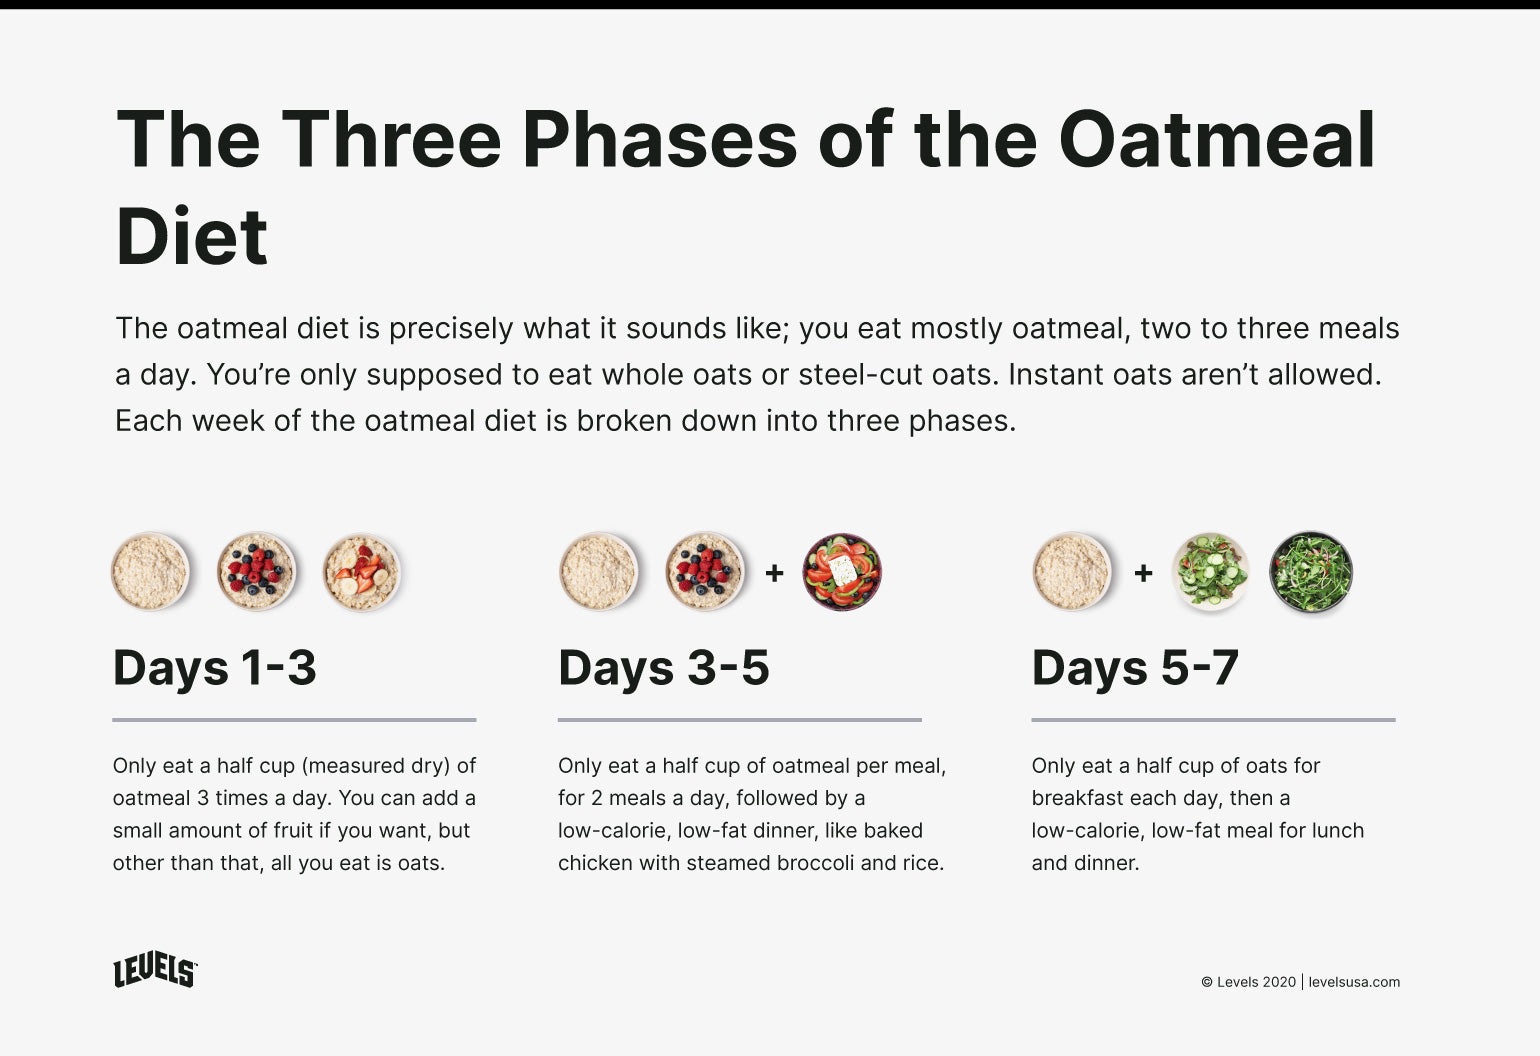 The Oatmeal Diet: Why It's a Terrible Weight Loss Plan - Levels